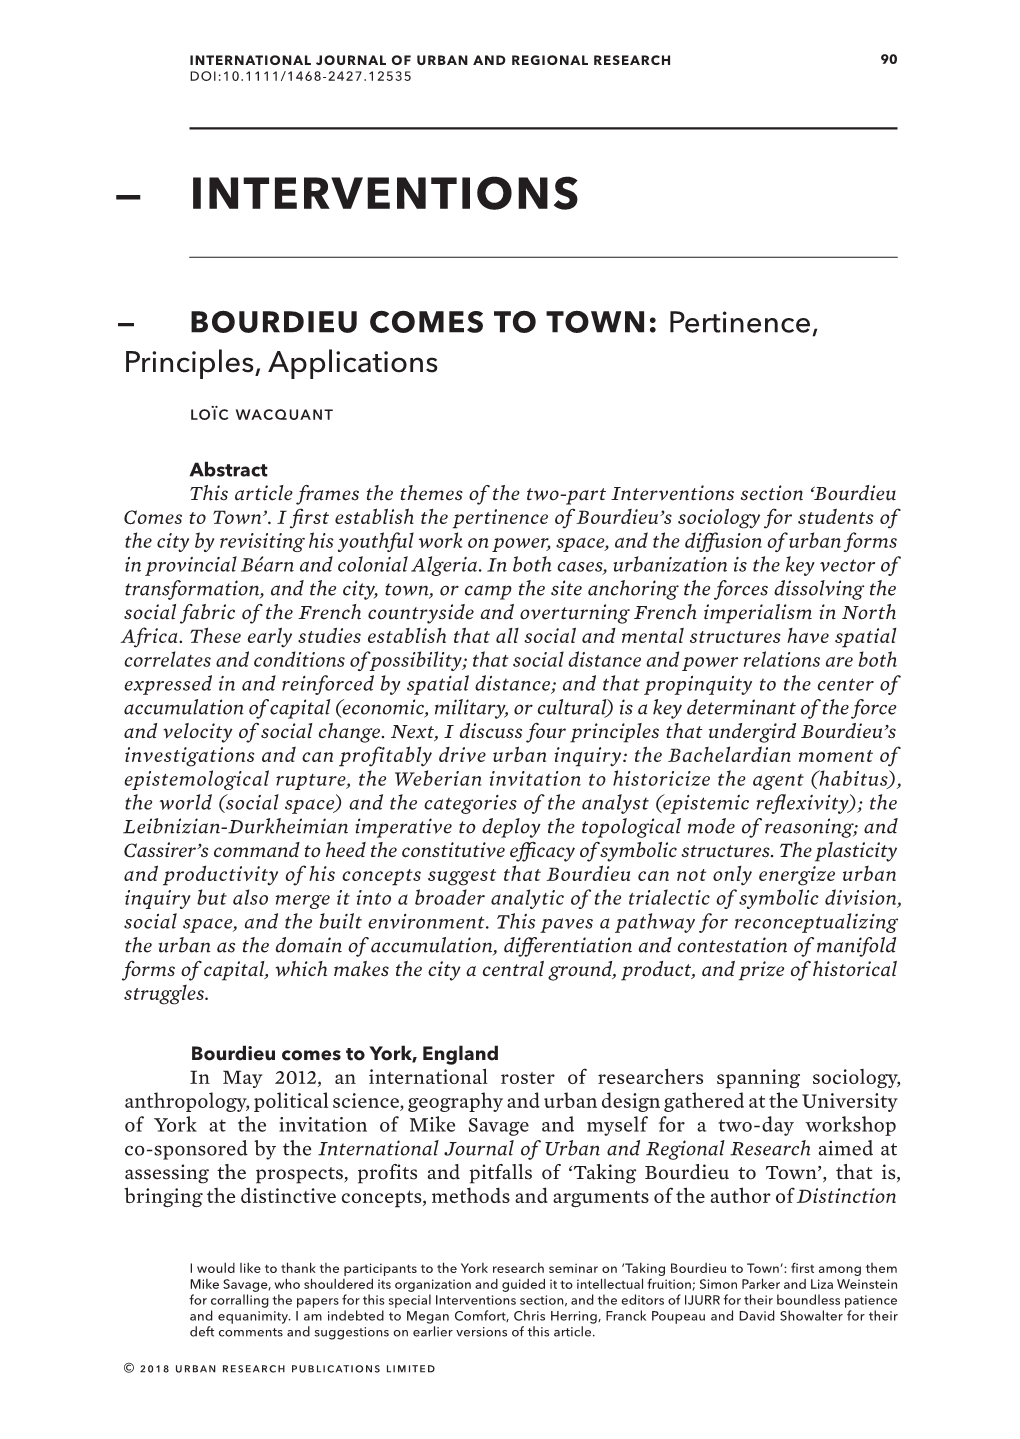 BOURDIEU COMES to TOWN: Pertinence, Principles, Applications